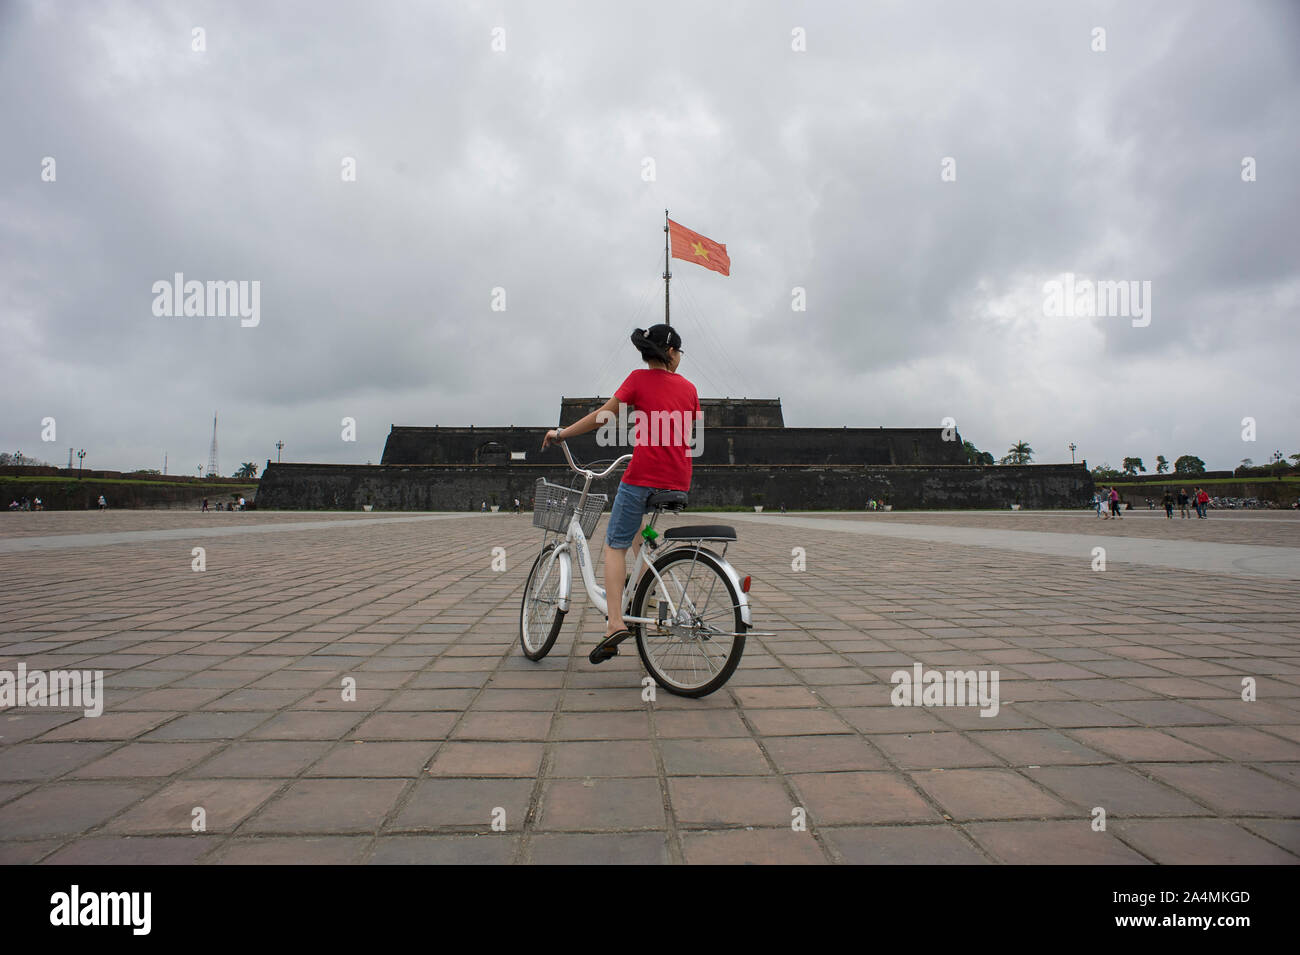 Hue, Thua Thien-Hue, Vietnam - February 27, 2011: A Vietnamese girl with red shirt cycling in a white bike in the Flag Tower (Cot Co) square Stock Photo